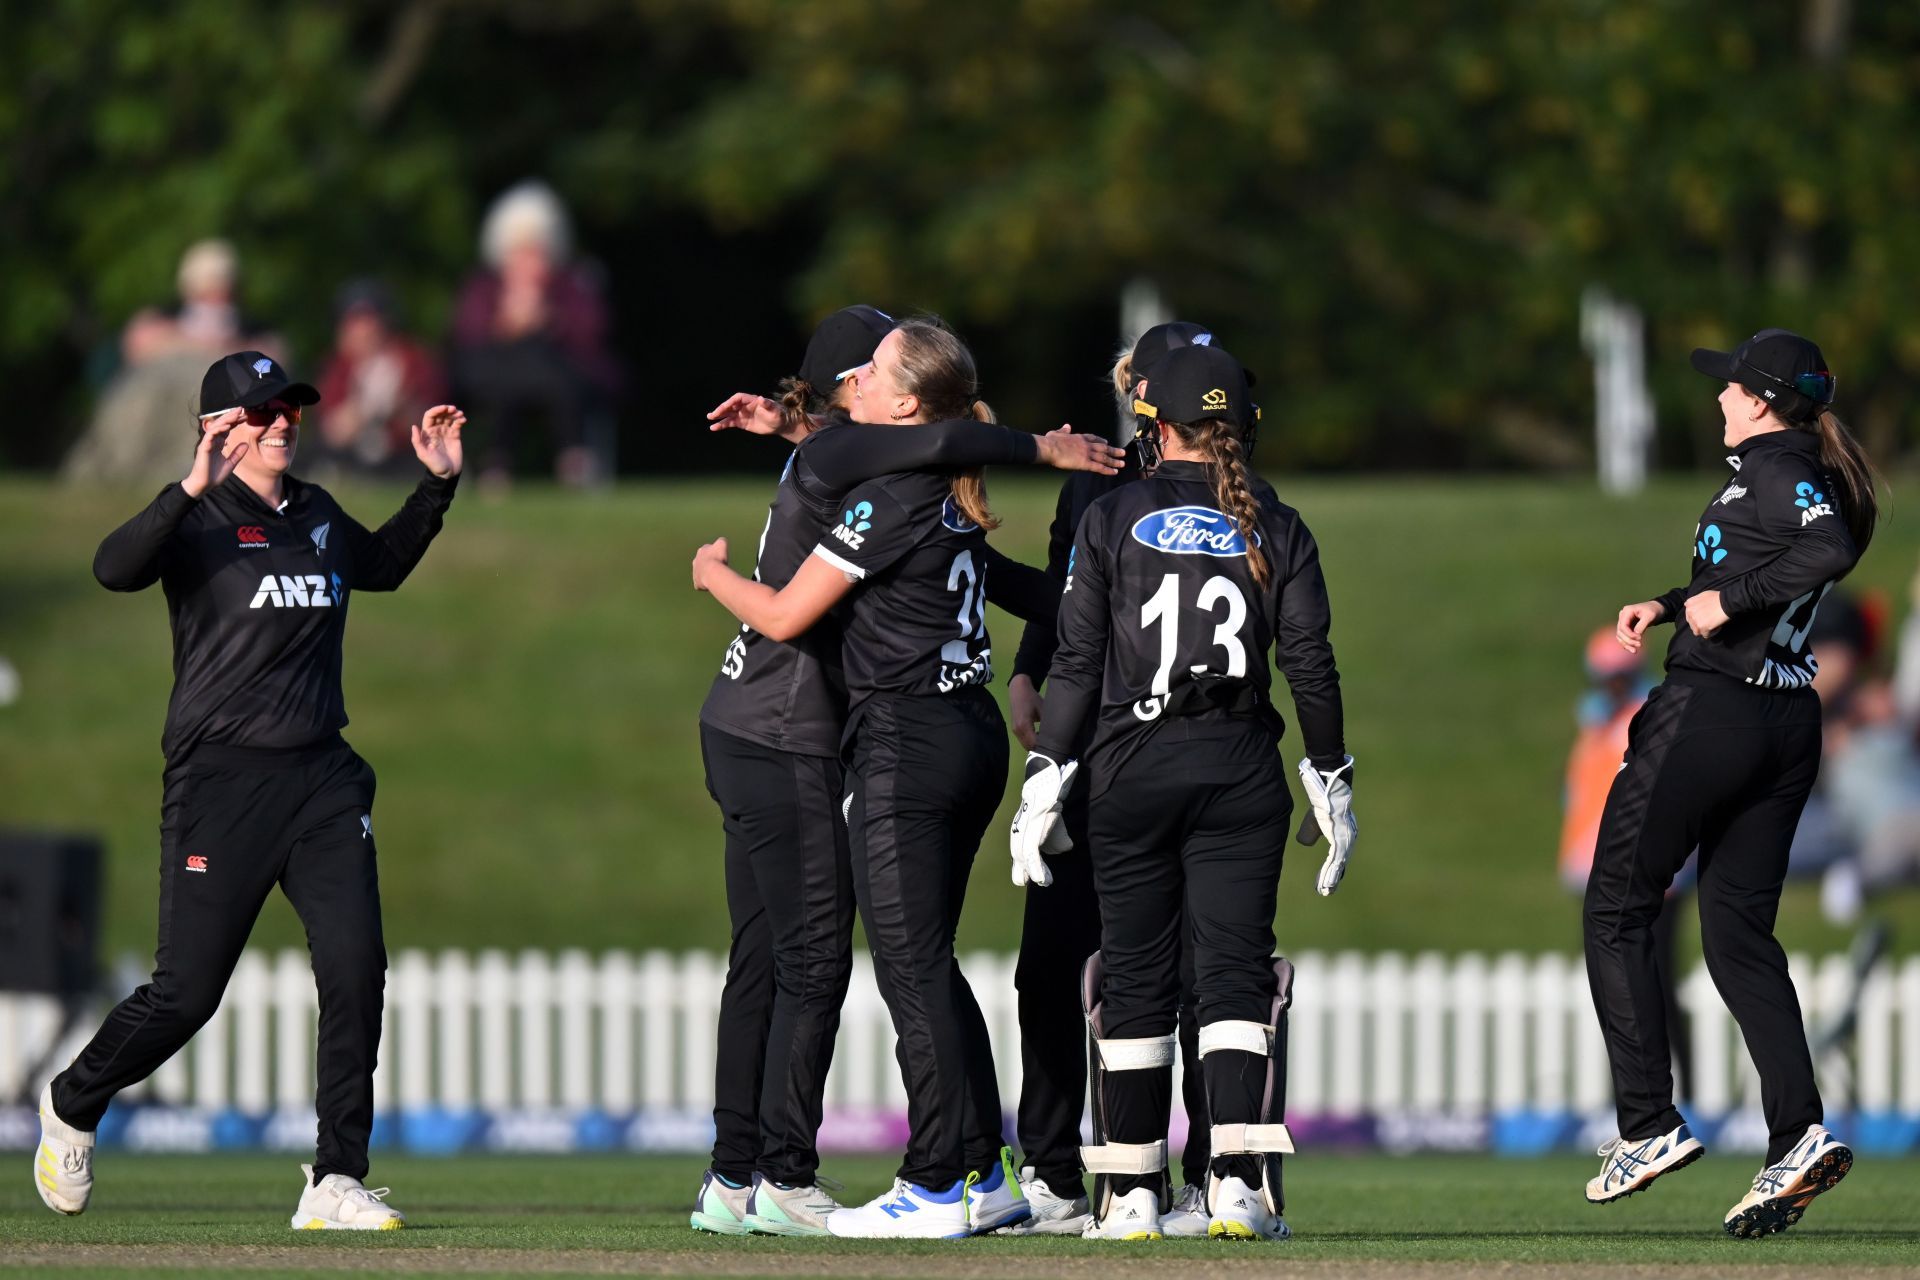 New Zealand team celebrate a wicket. (Pic: Getty Images)